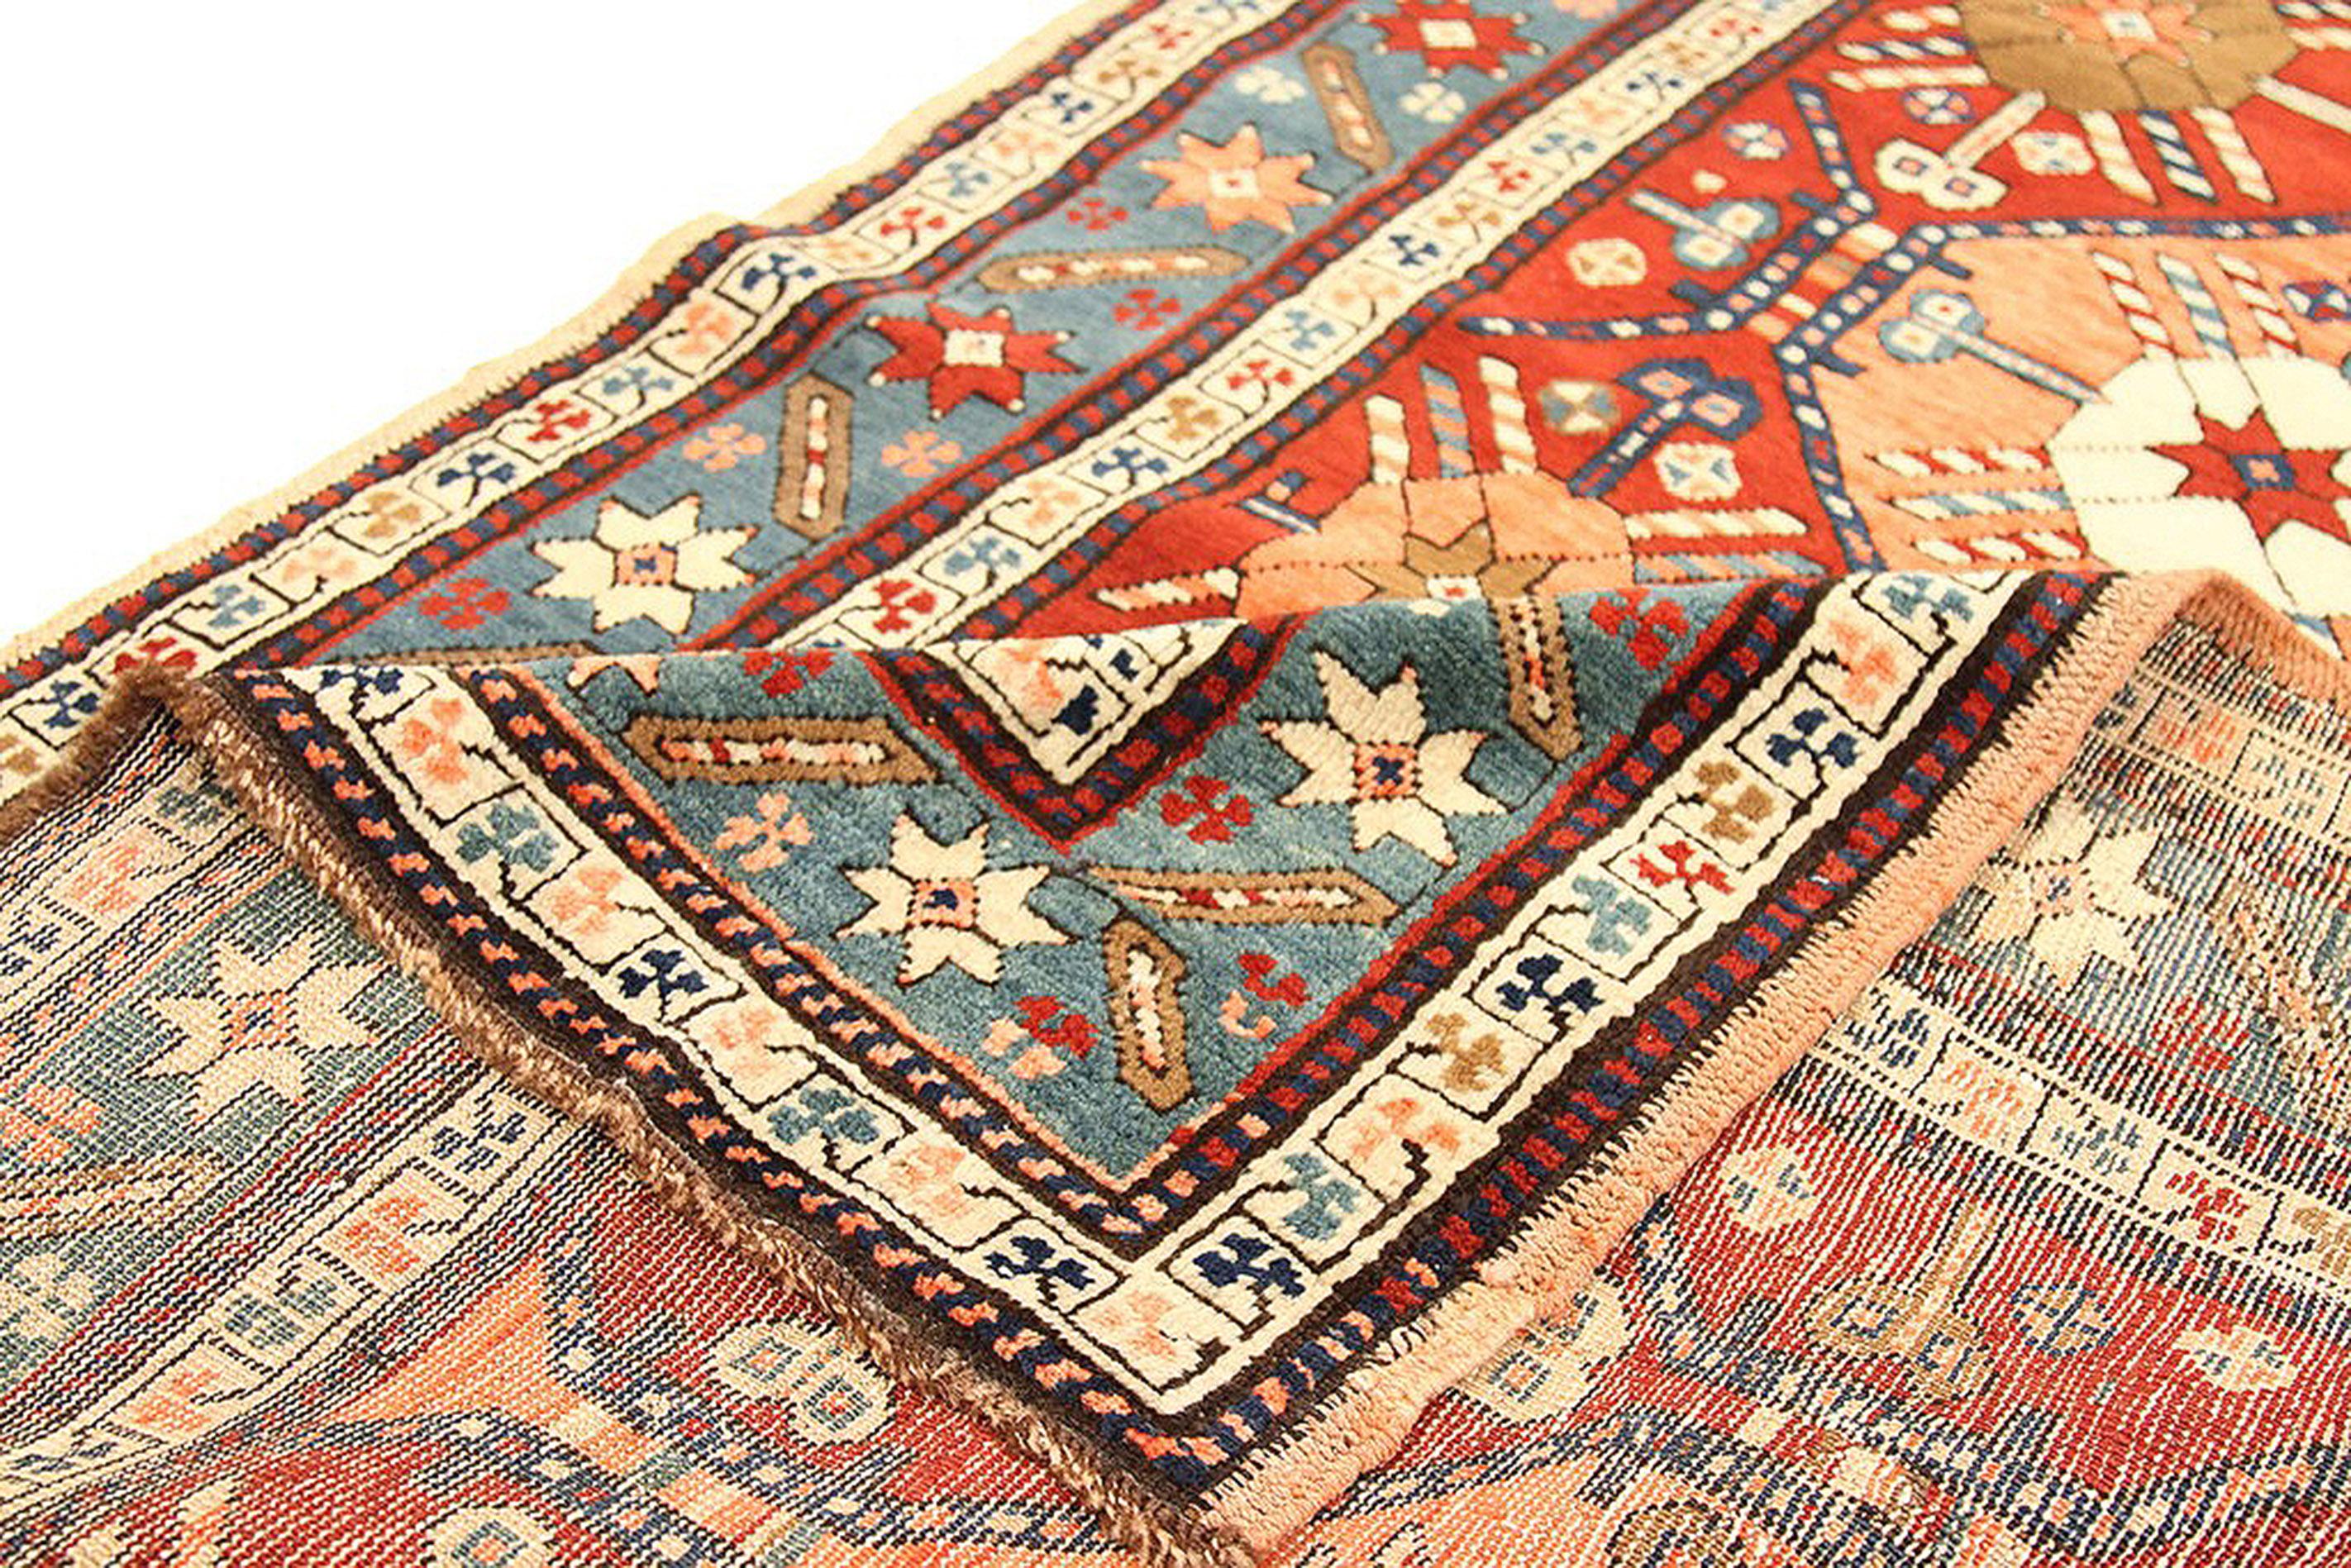 Antique Russian runner rug handwoven from the finest sheep’s wool and colored with all-natural vegetable dyes that are safe for humans and pets. It’s a traditional Kazak design featuring star and geometric medallion details in various colors over an